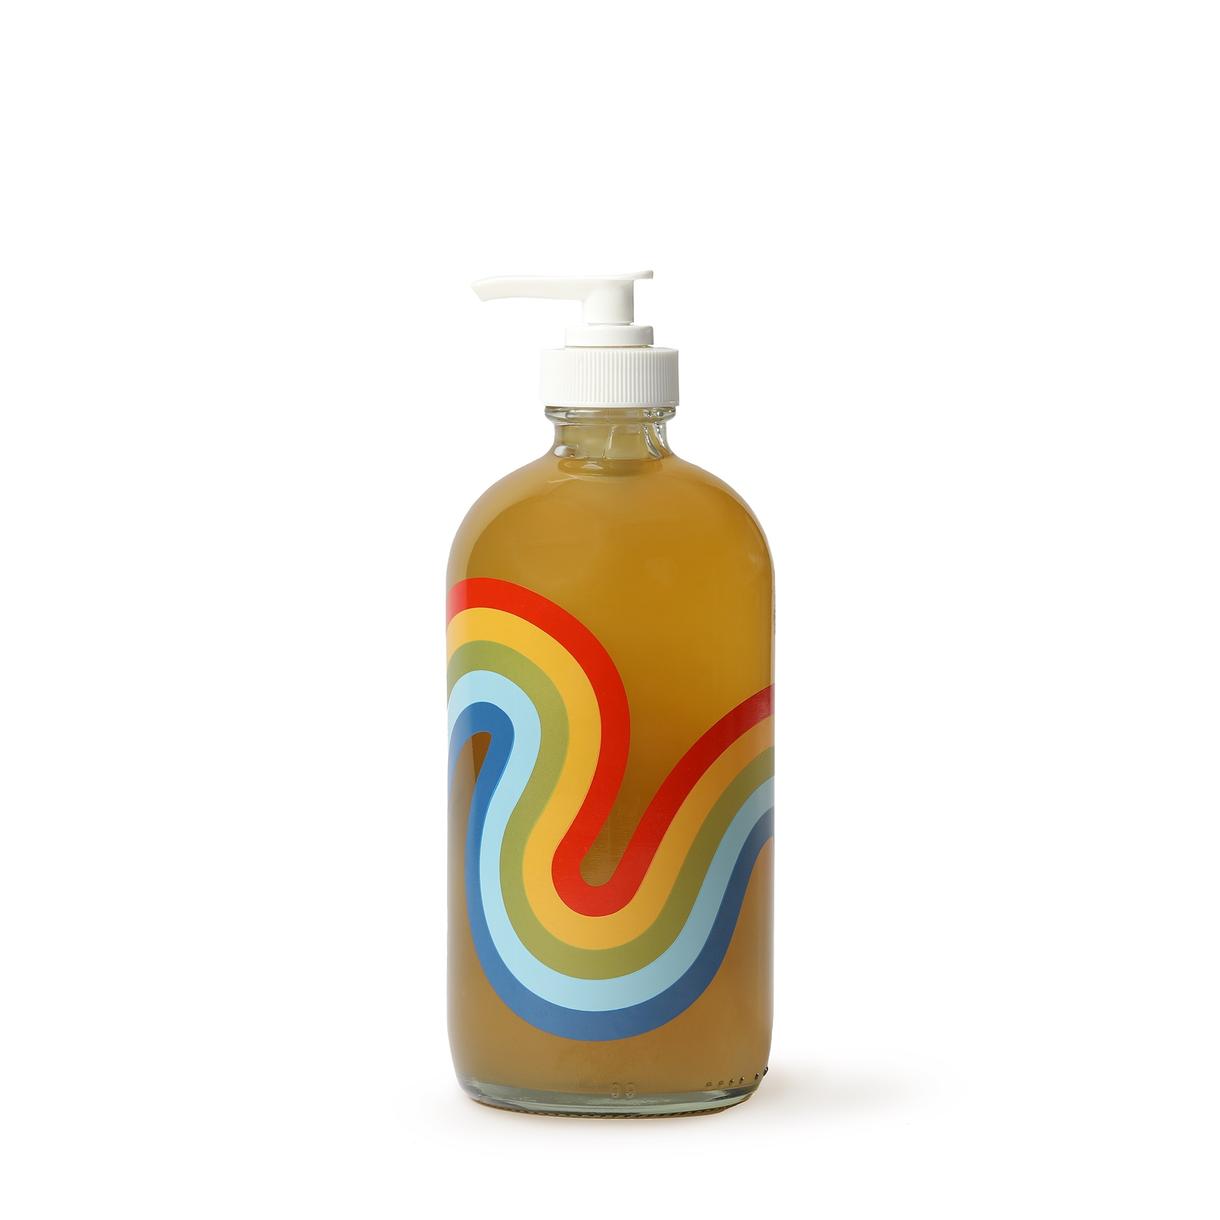 Bathing Culture Mind and Body Wash Refillable Glass